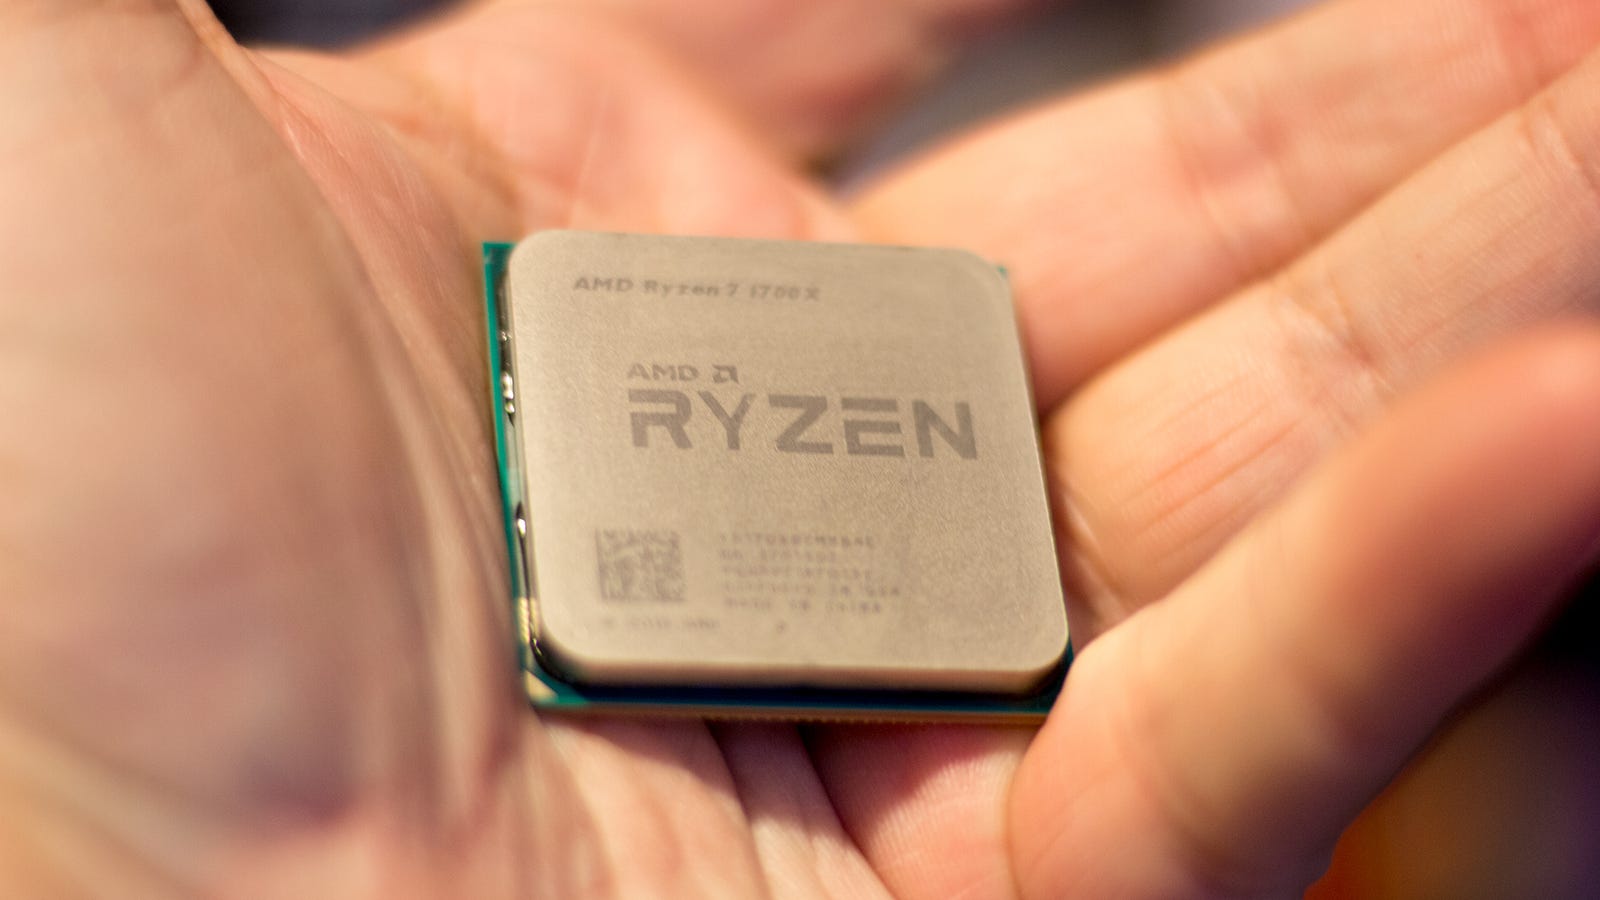 AMD's Ryzen CPUs Are Here To Take On Intel